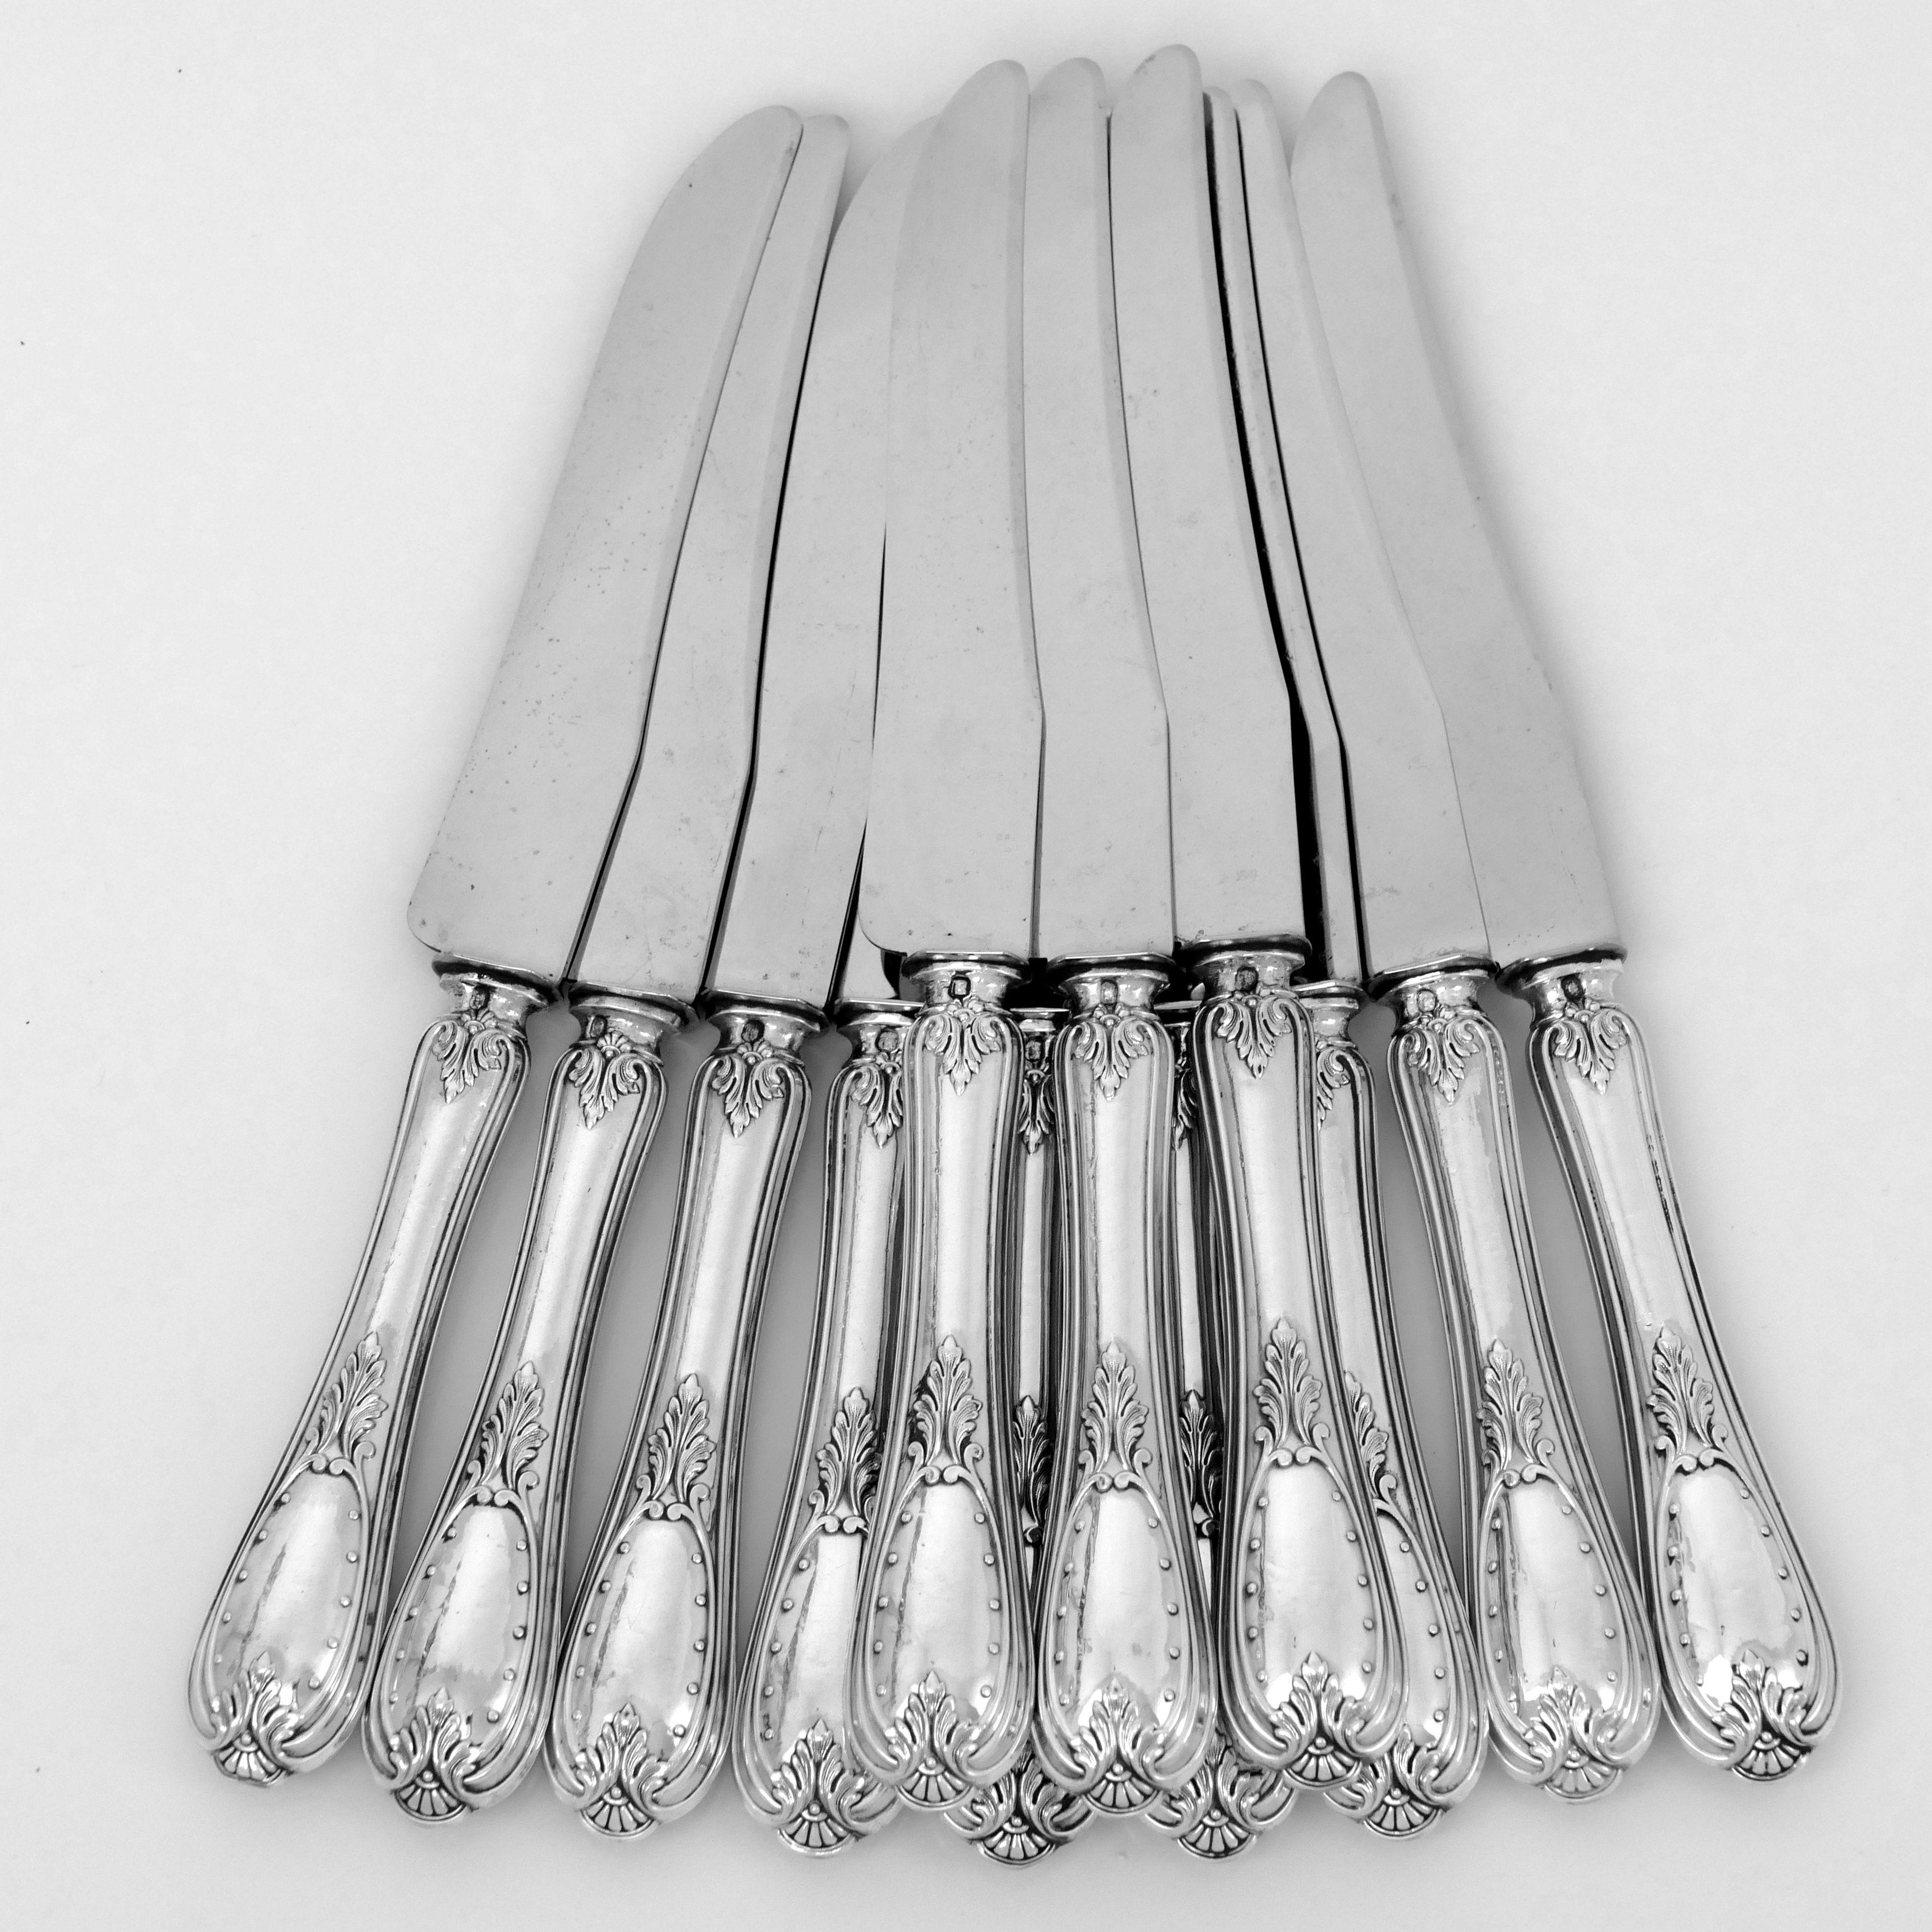 Coignet French Sterling Silver Dinner Knife Set 12 Pieces with Box, Neoclassical 8